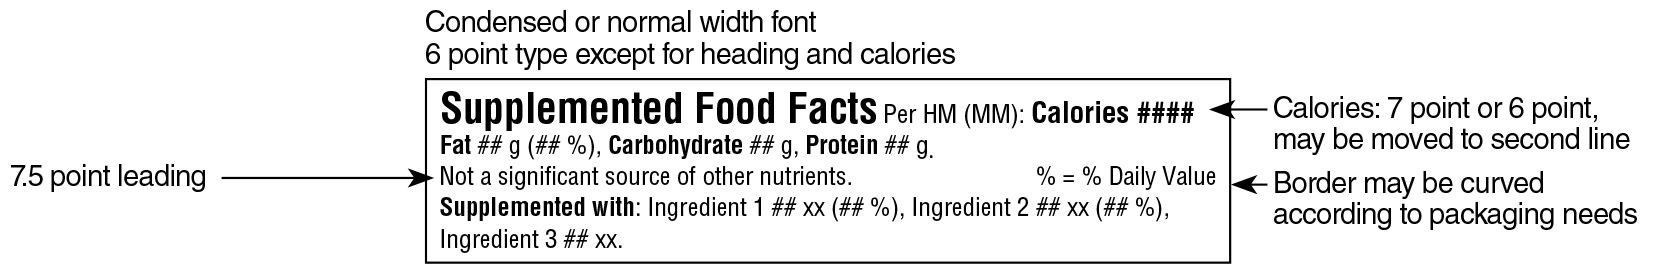 An English Supplemented Food Facts table in simplified linear format surrounded by specifications. Text version below.